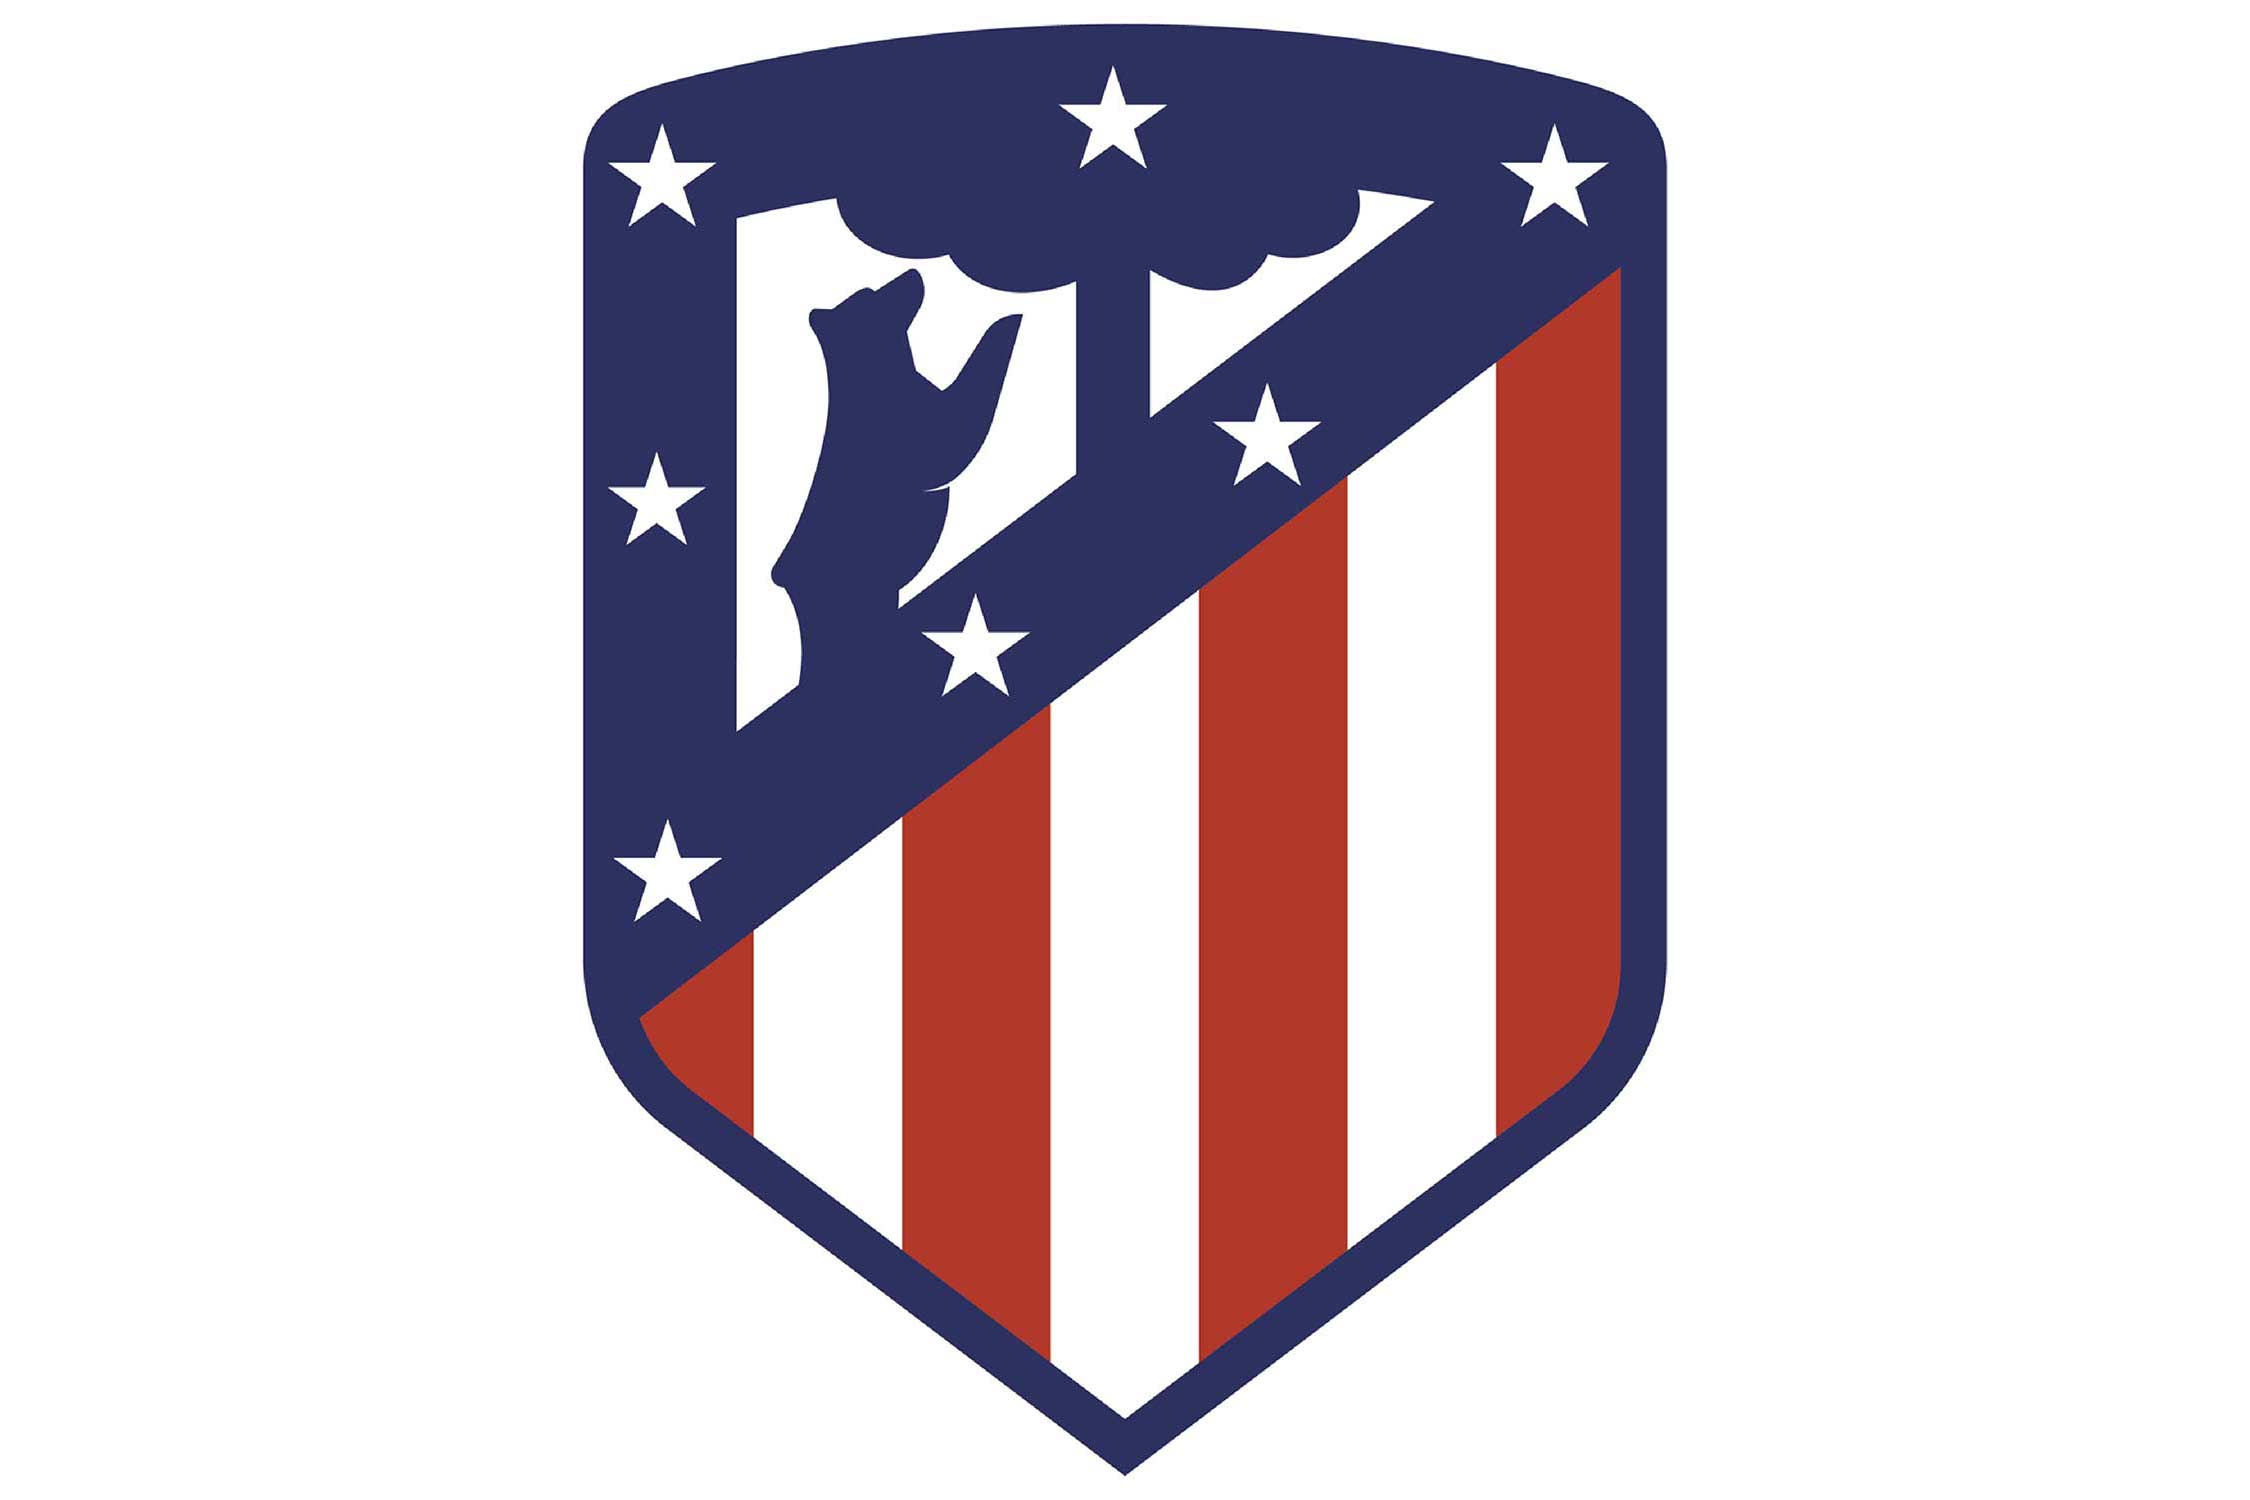 Red White Blue Soccer Logo - Hidden explanations for soccer clubs' crests around the world | SI.com